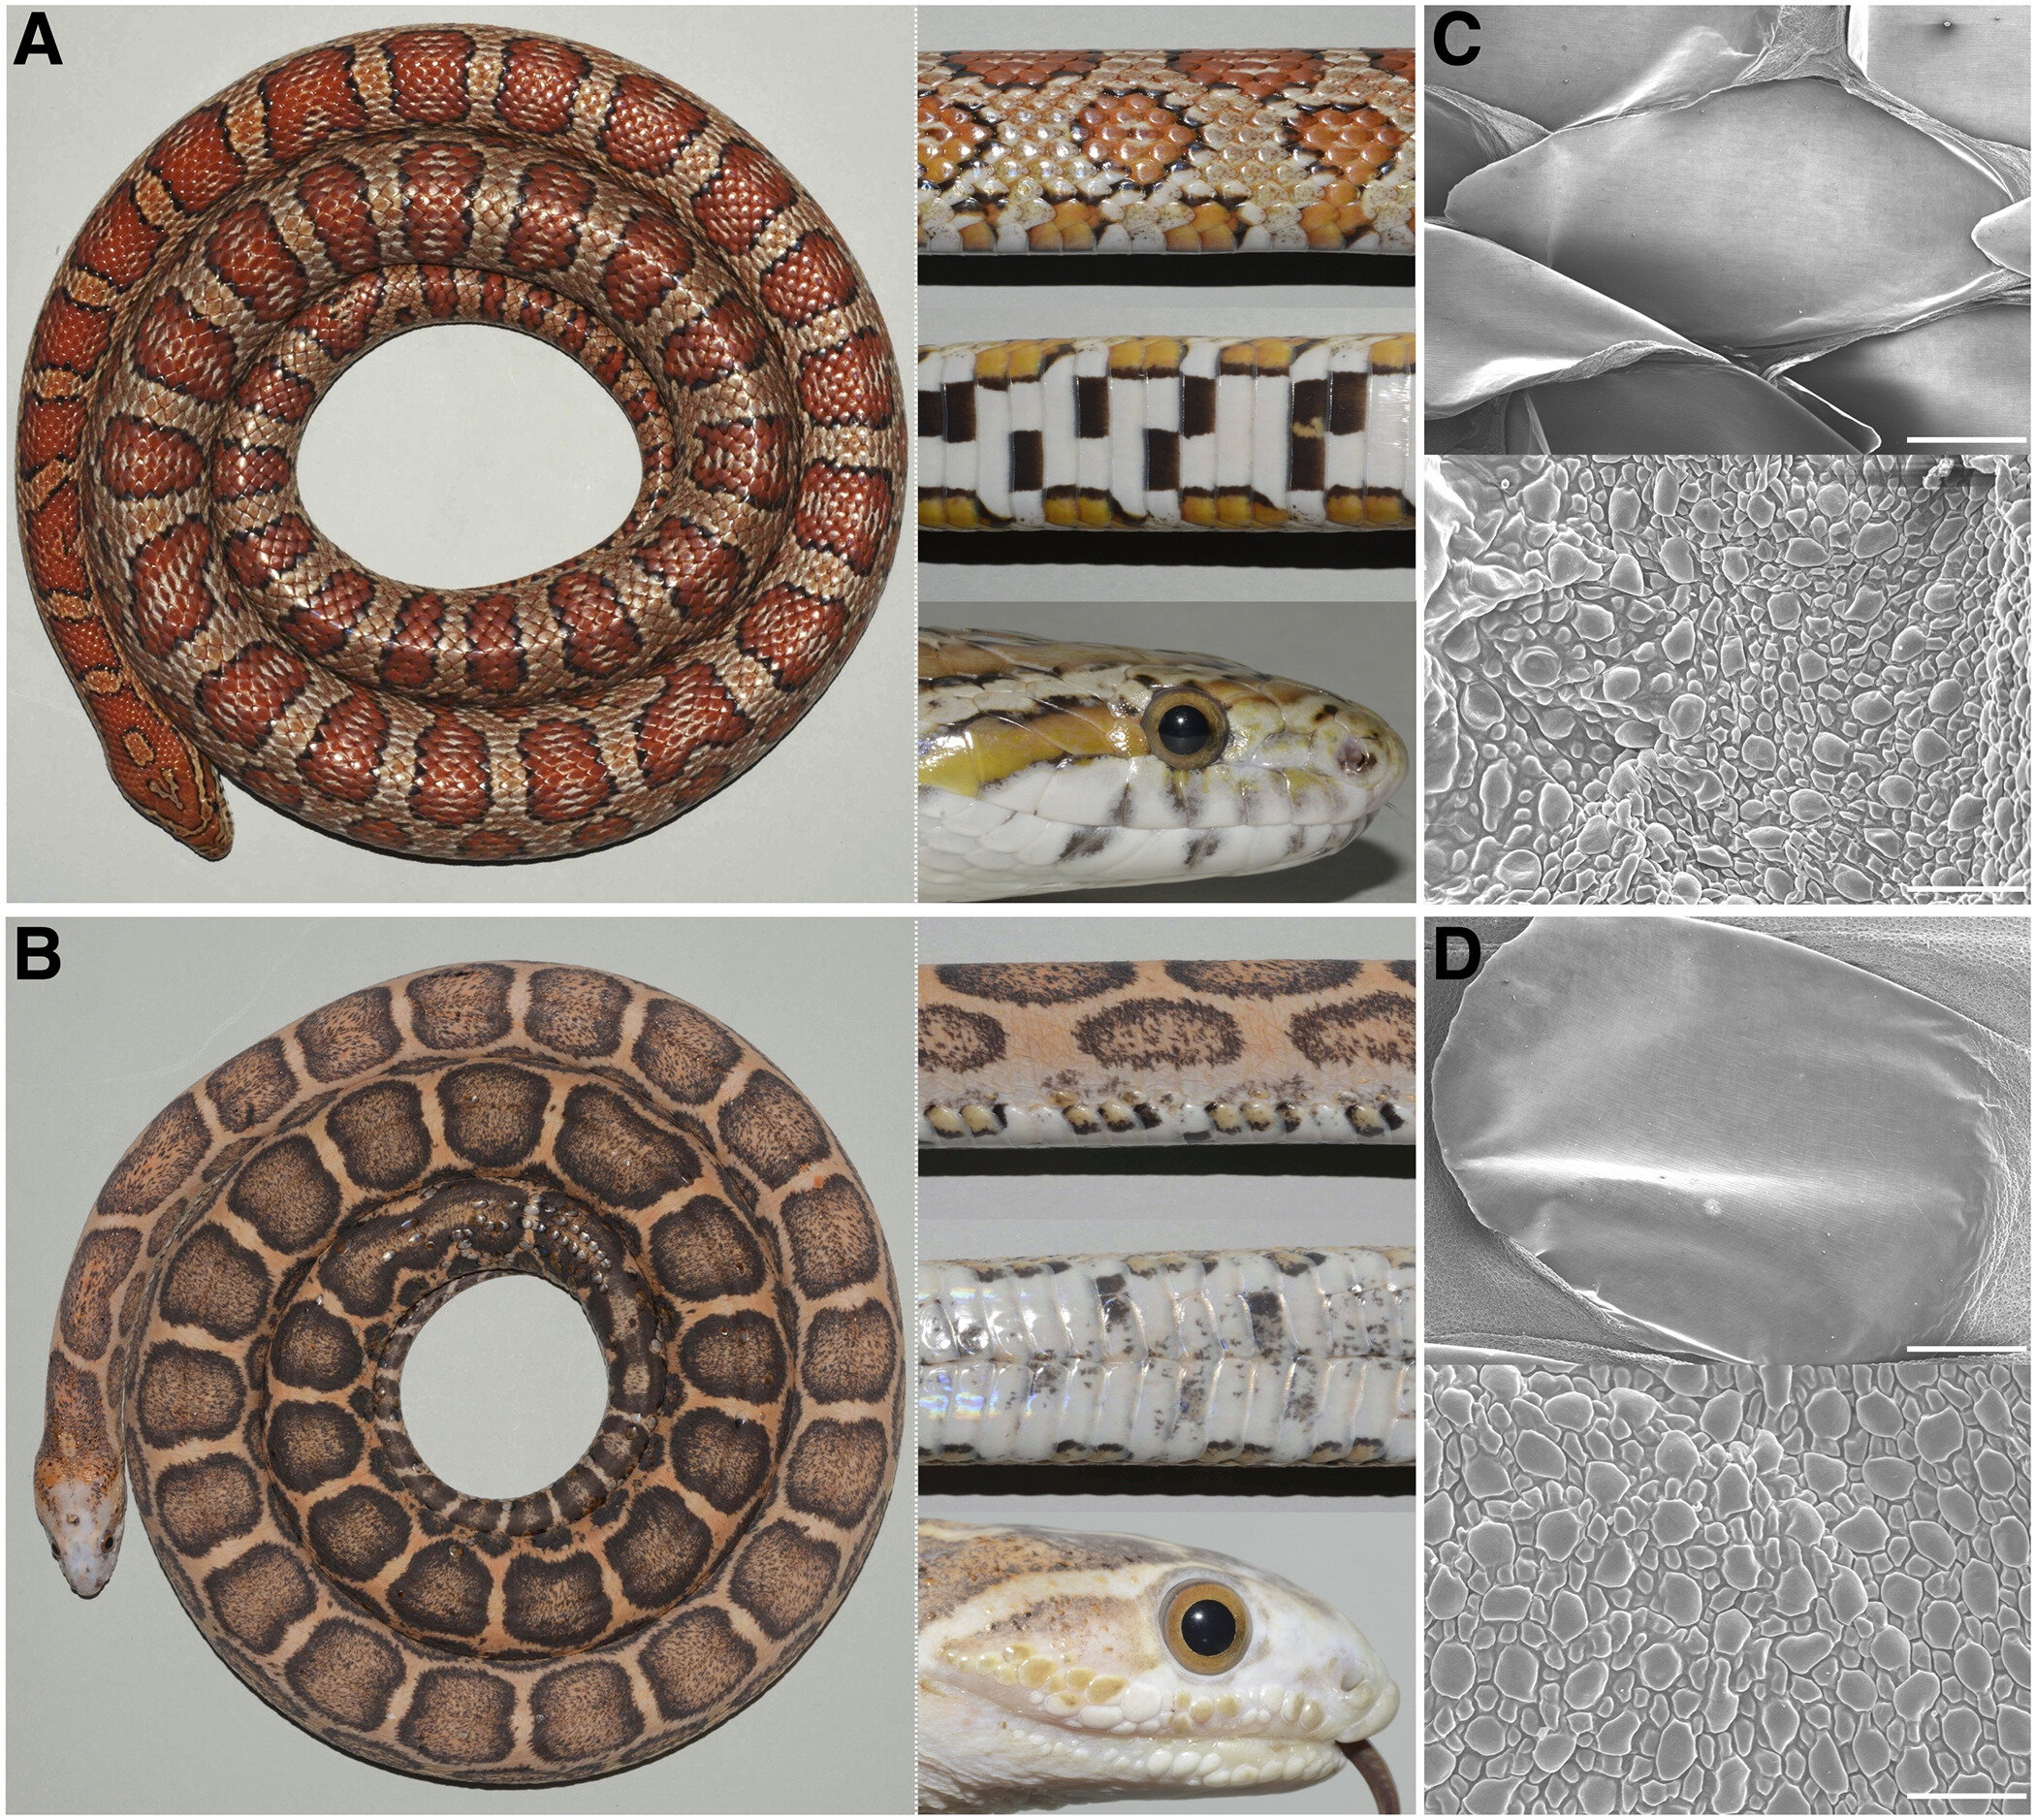 editing a snake genome